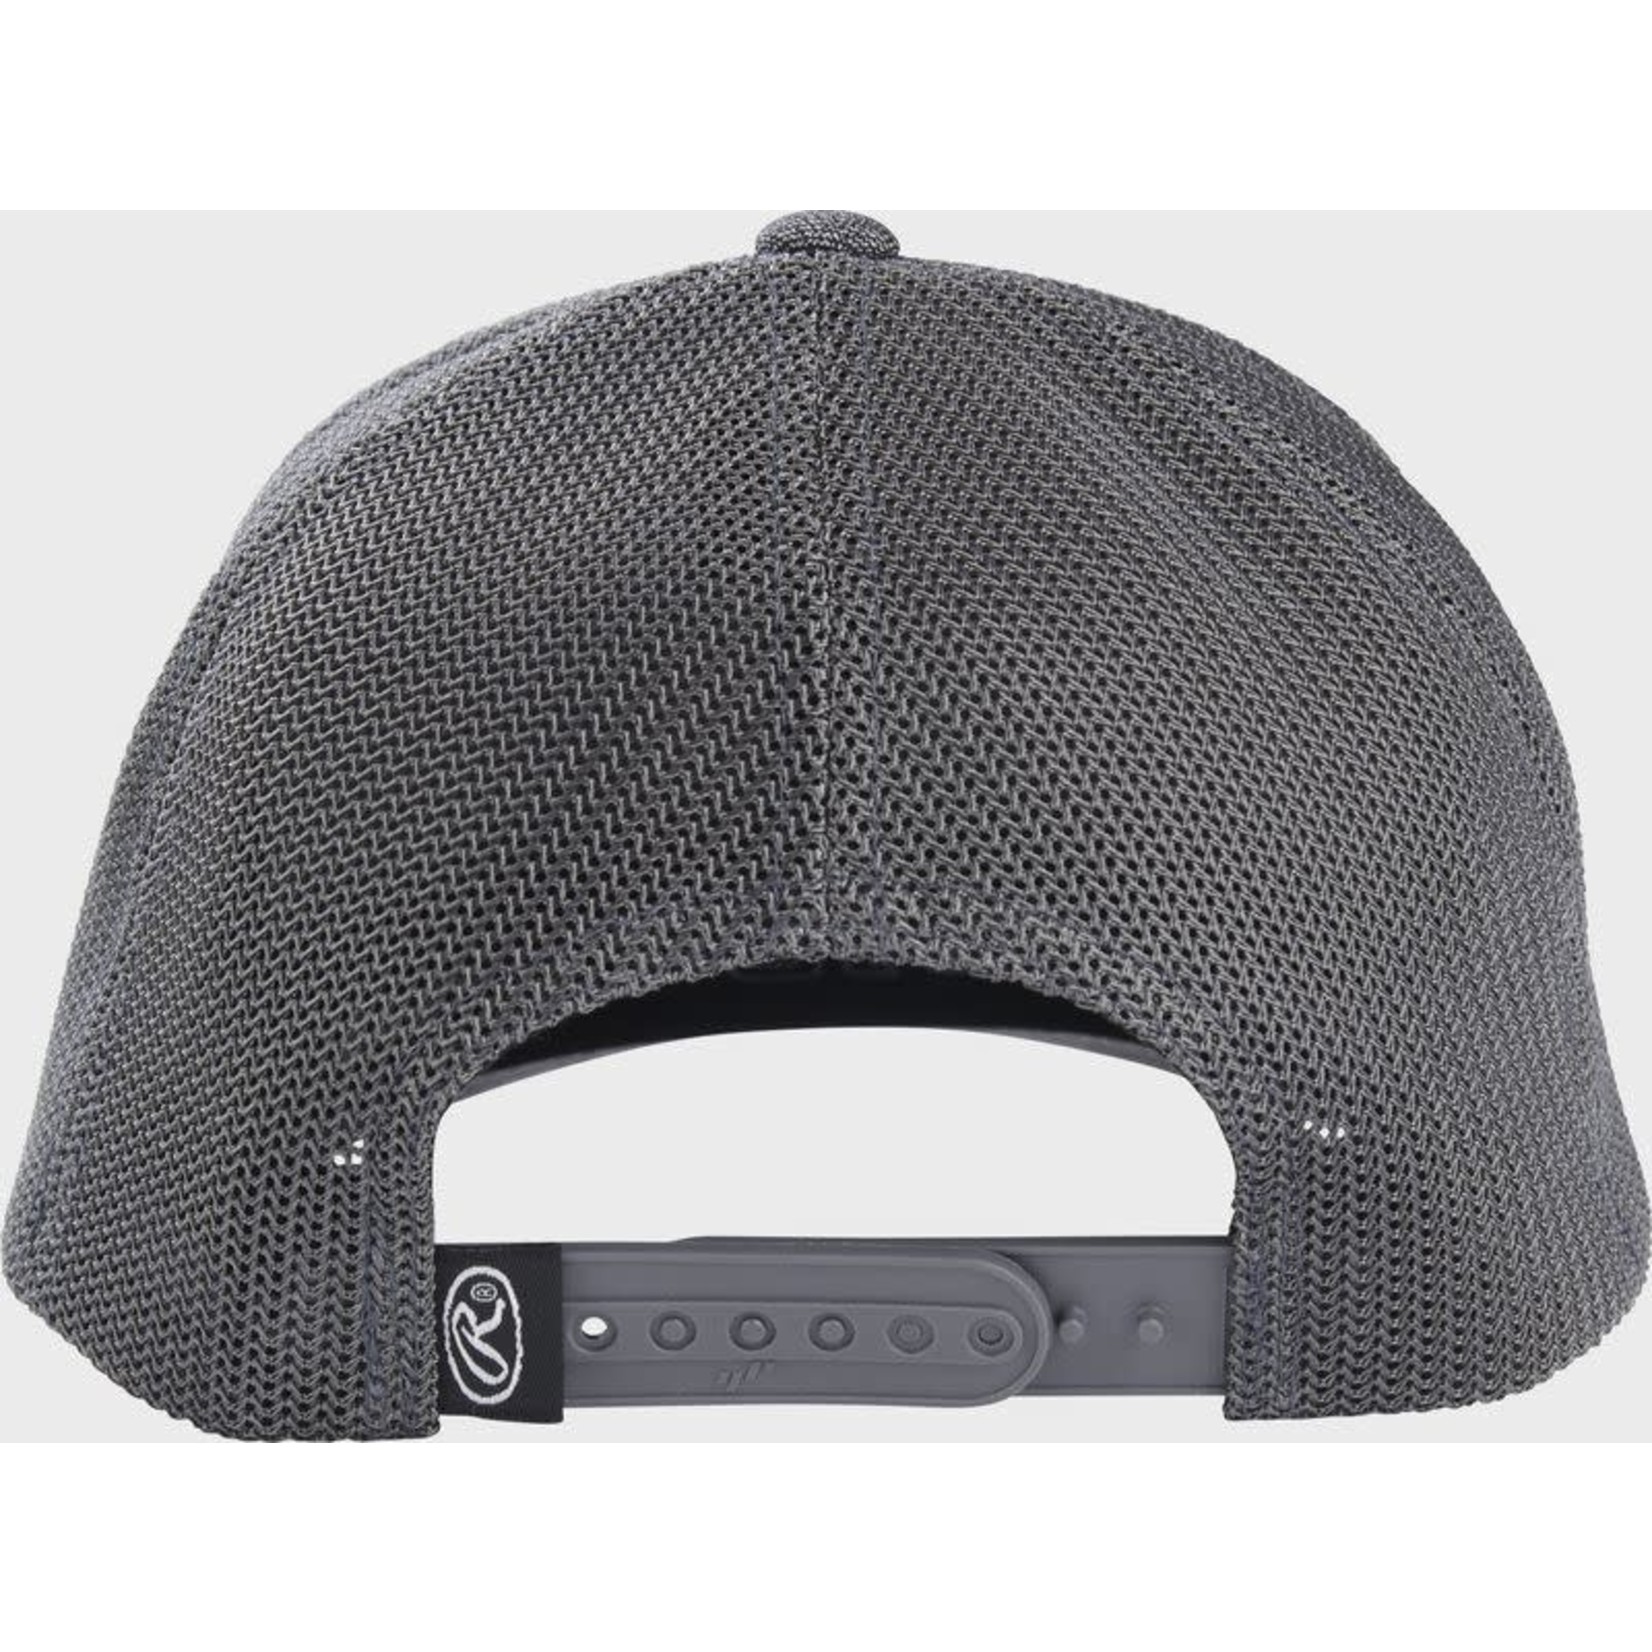 Rawlings Leather Patch Mesh Snap Back Trucker